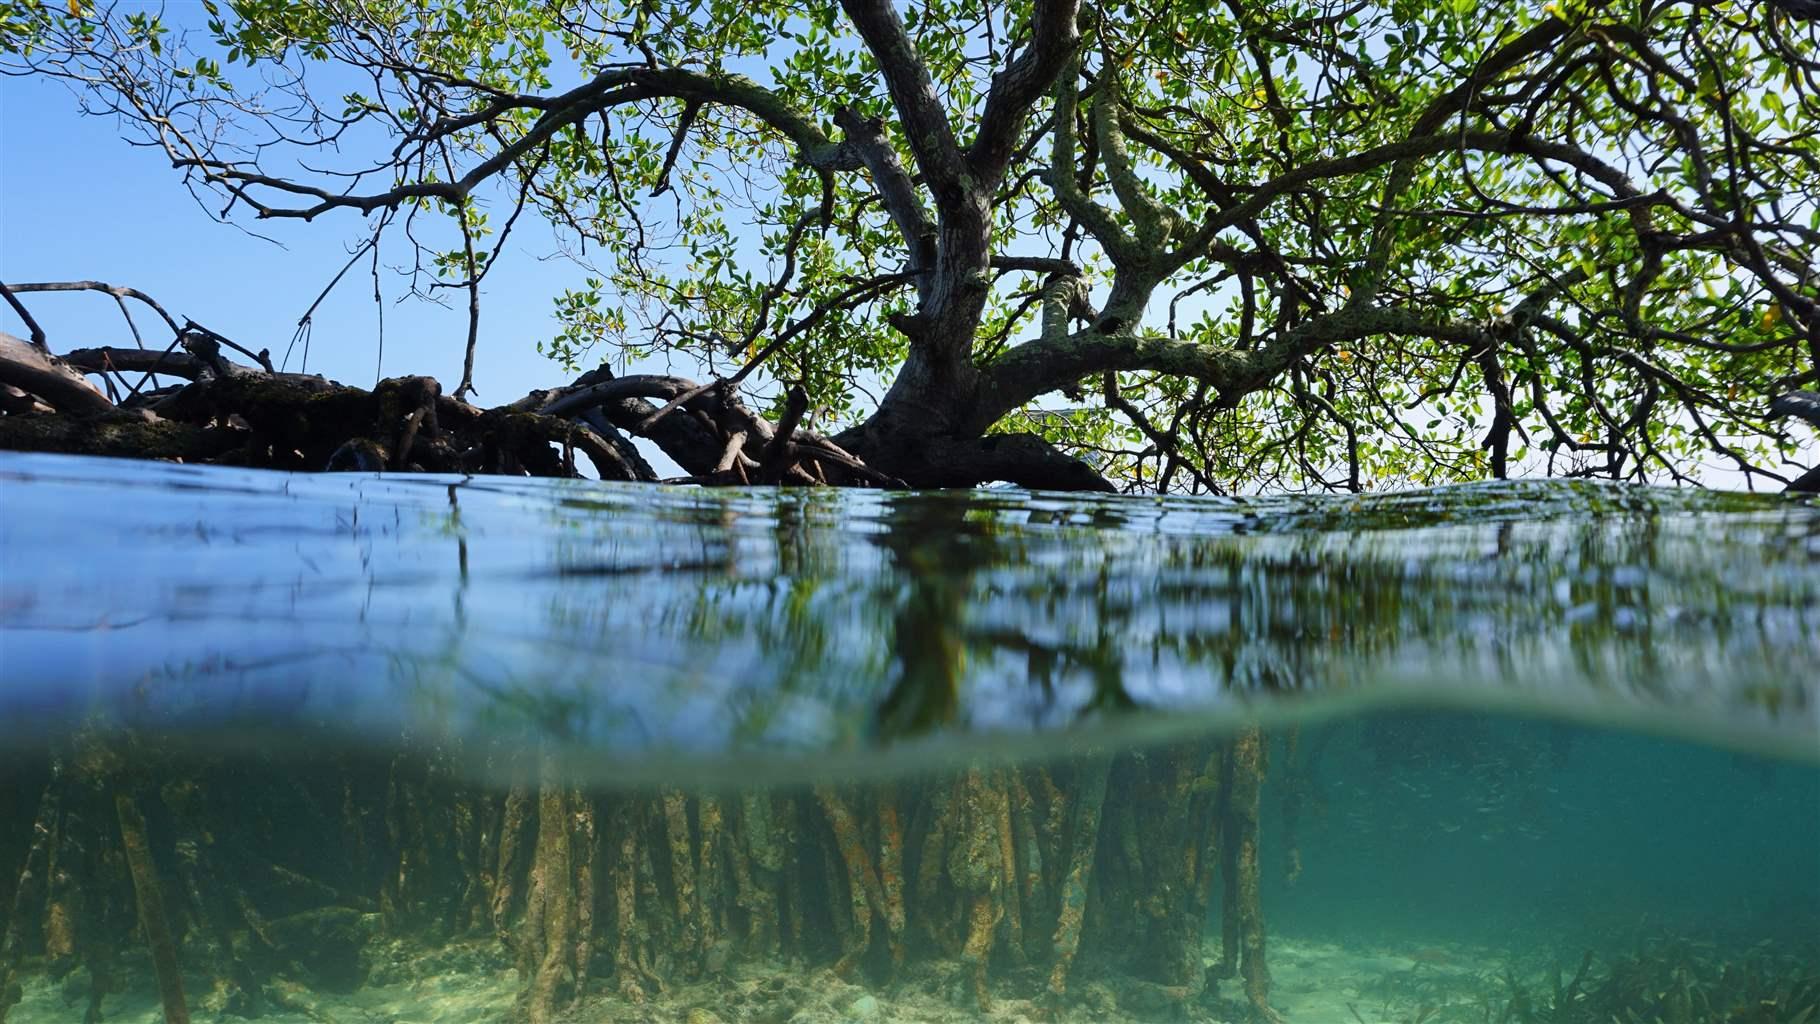 Split shot of a red mangrove tree over and under sea surface with its roots and a starfish underwater, Caribbean, Belize